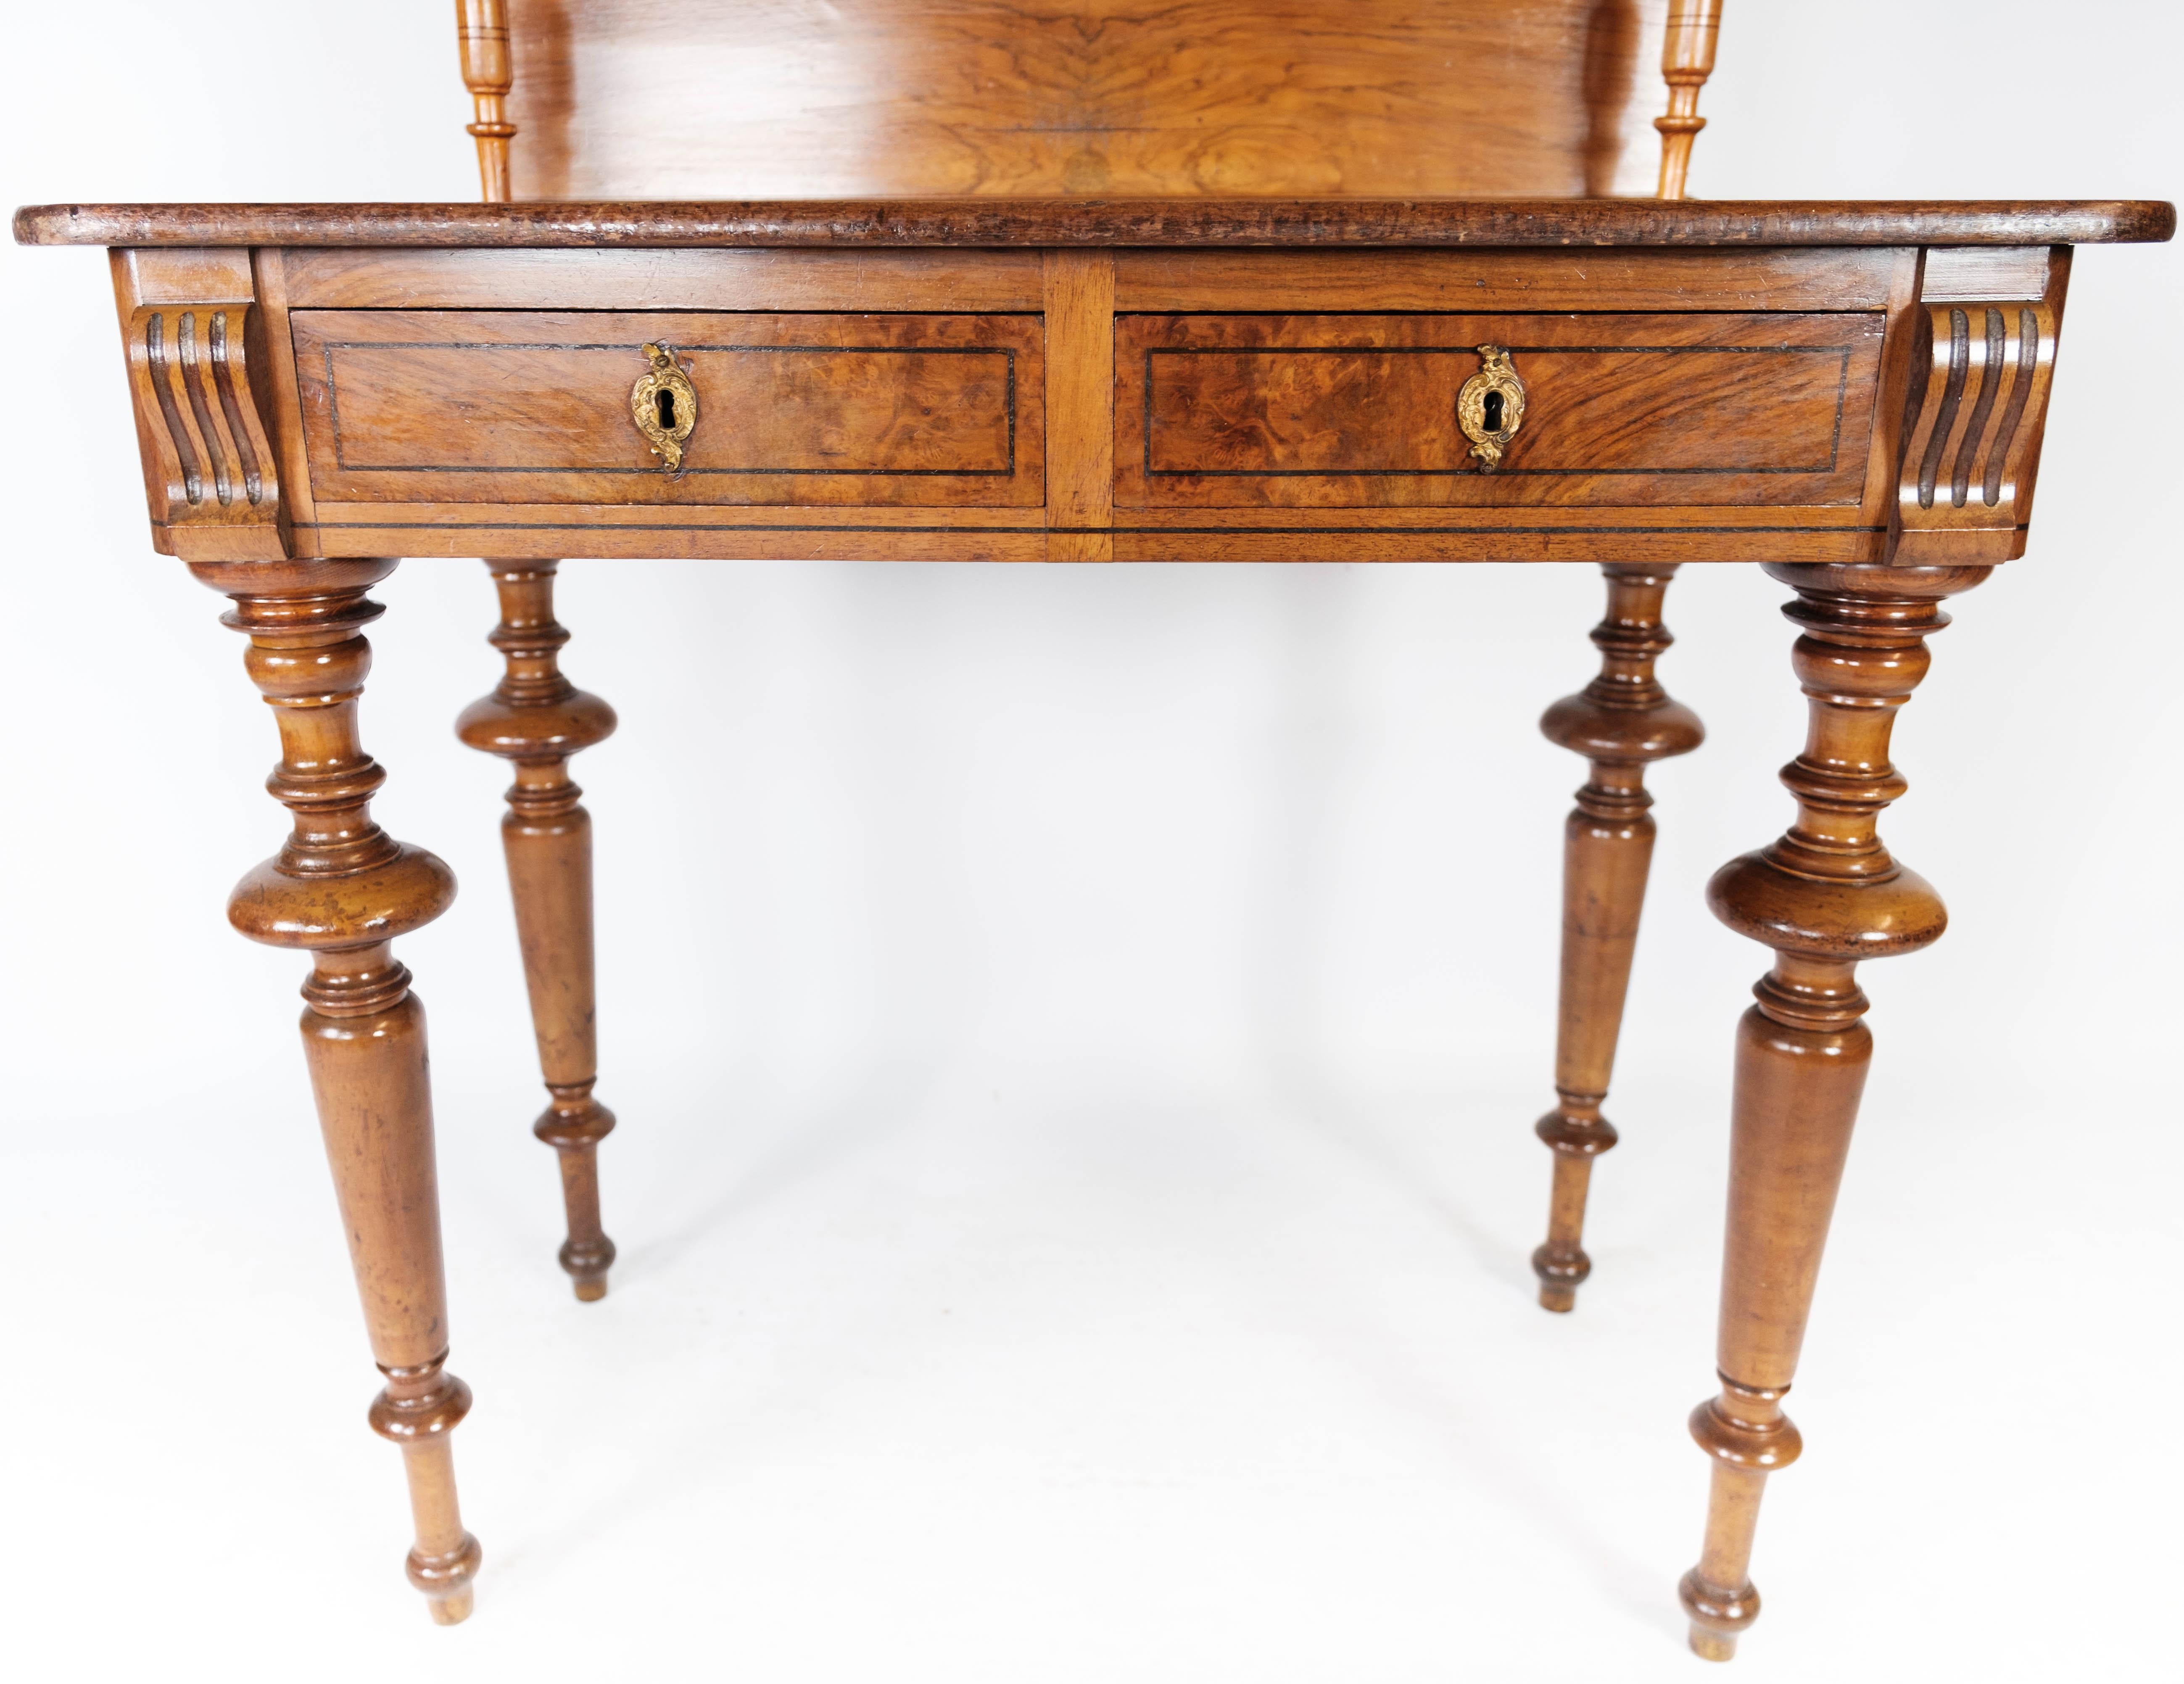 Dressing table/desk of walnut and decorated with carvings, in great antique condition from the 1880s.
   